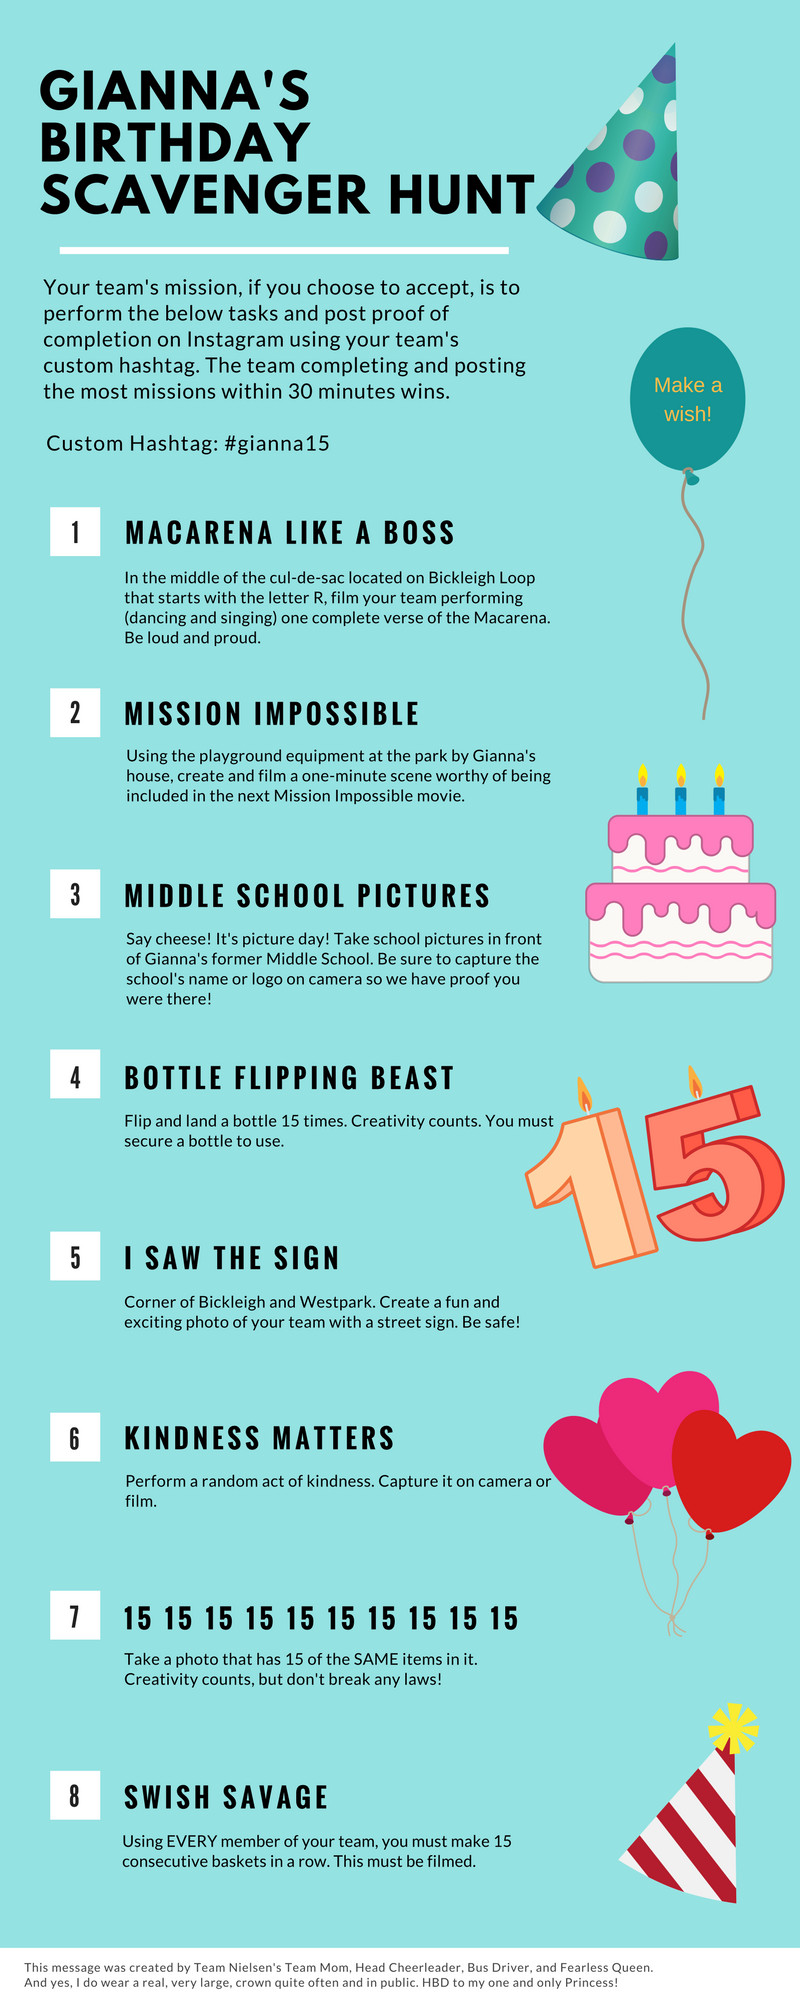 Scavenger Hunt Birthday Party Ideas
 I created this DIY scavenger hunt for my daughter s 15th